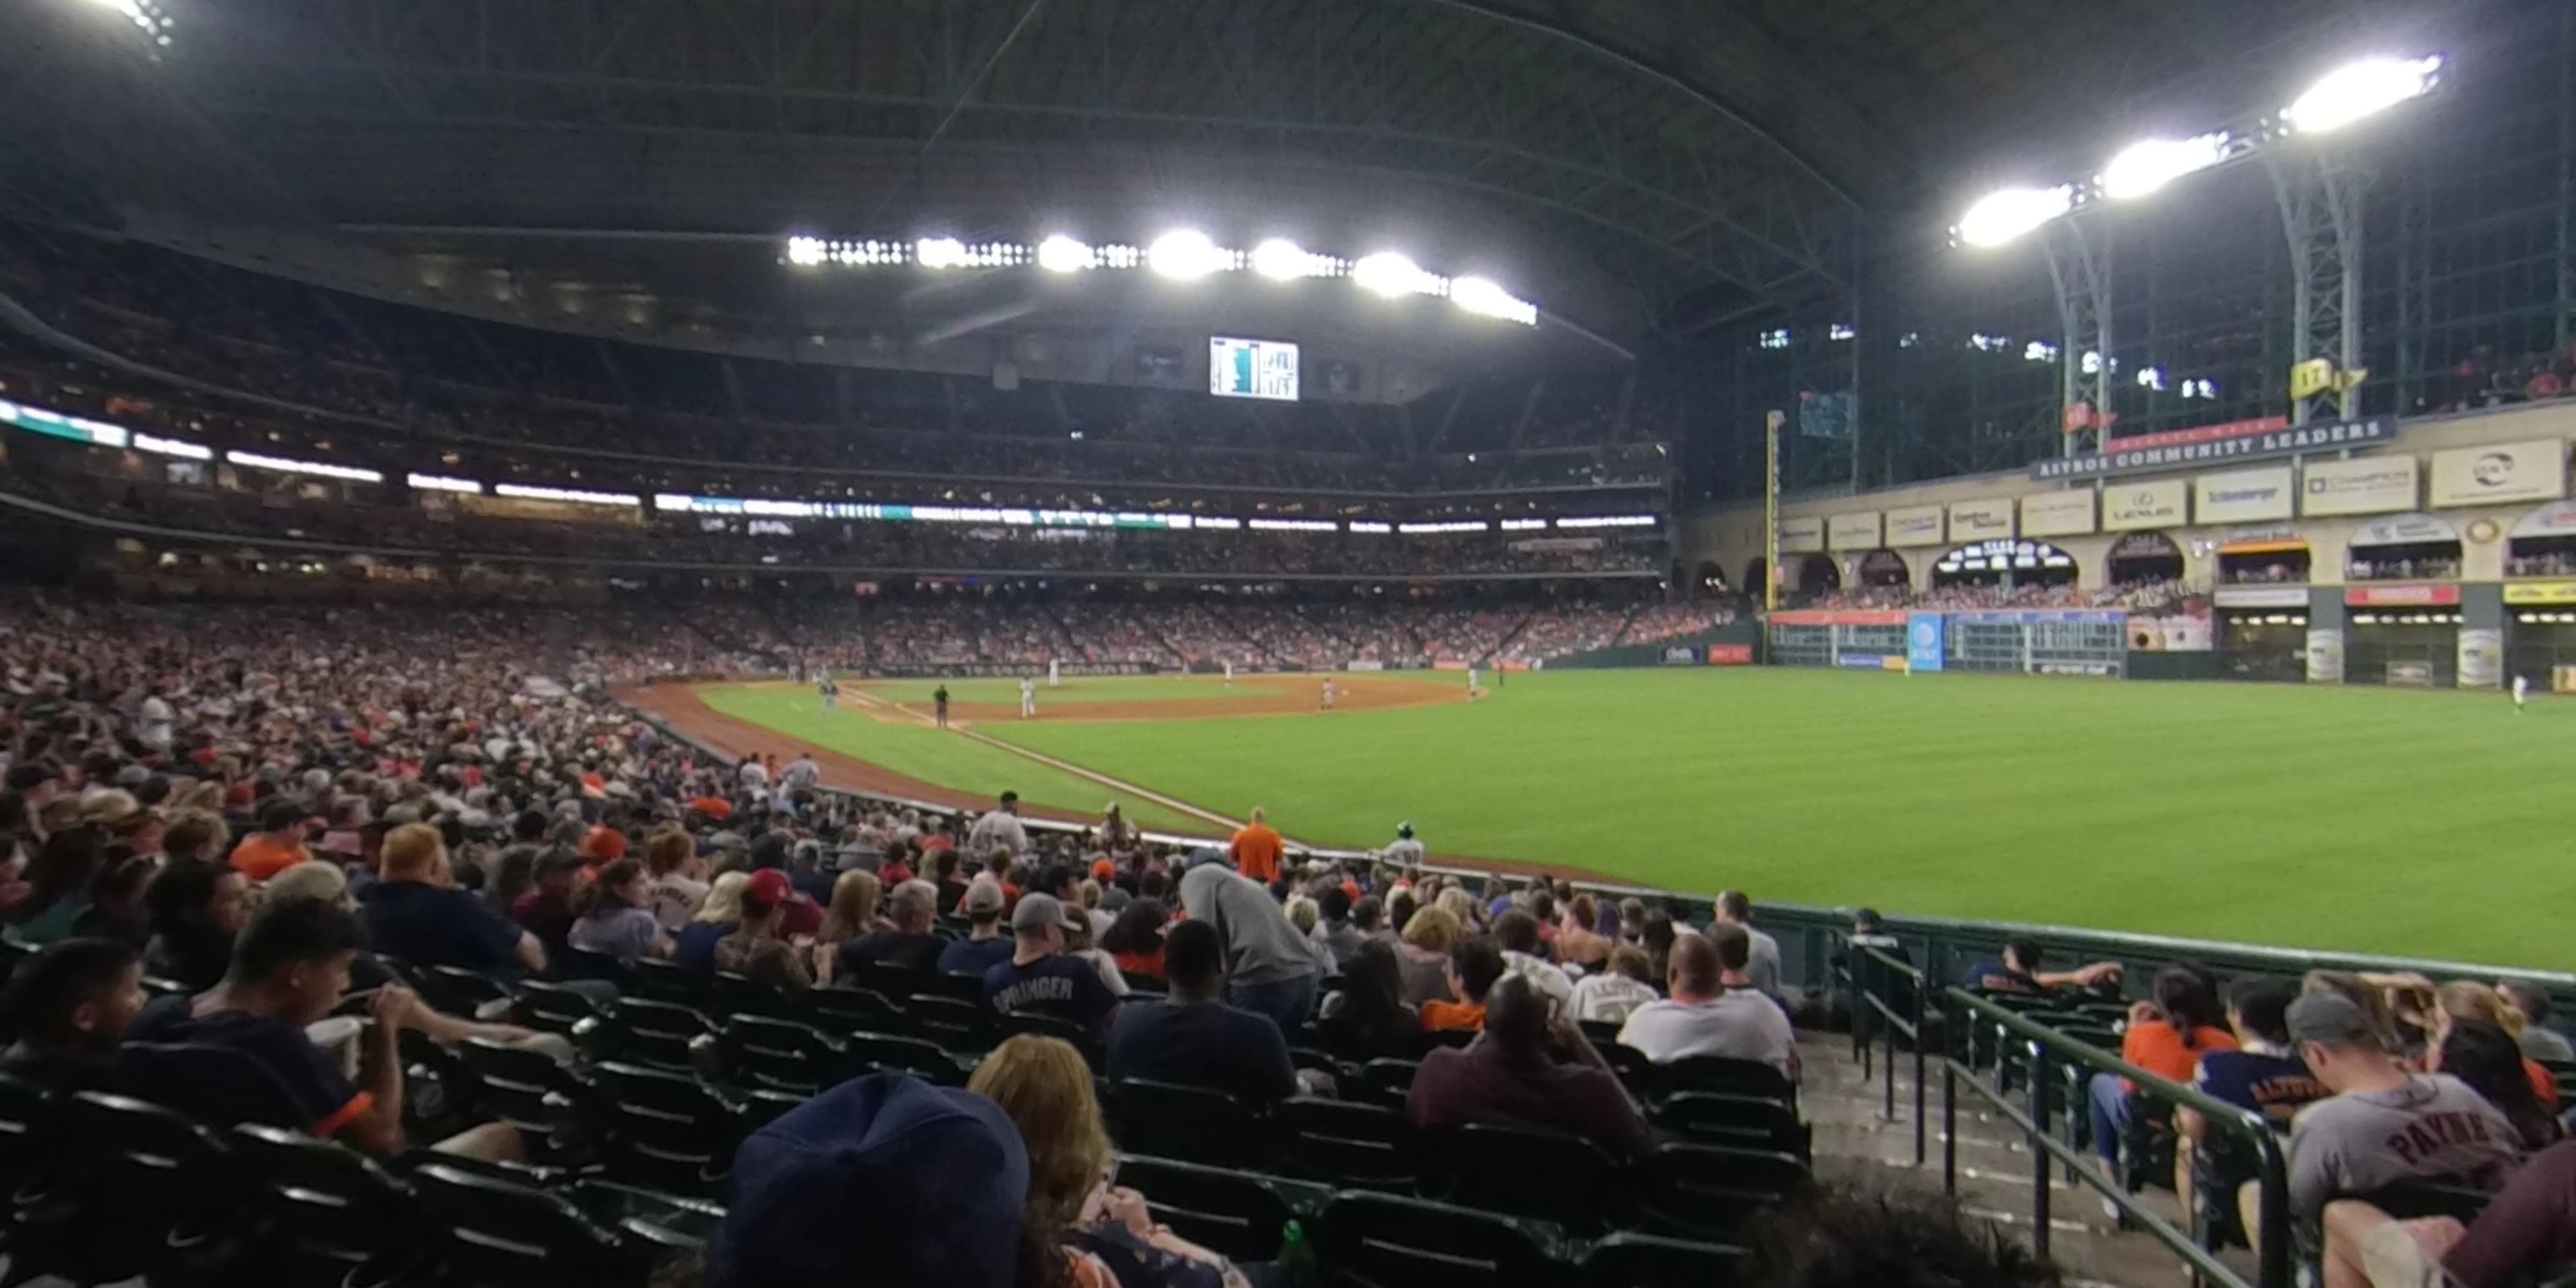 Section 133 at Minute Maid Park 